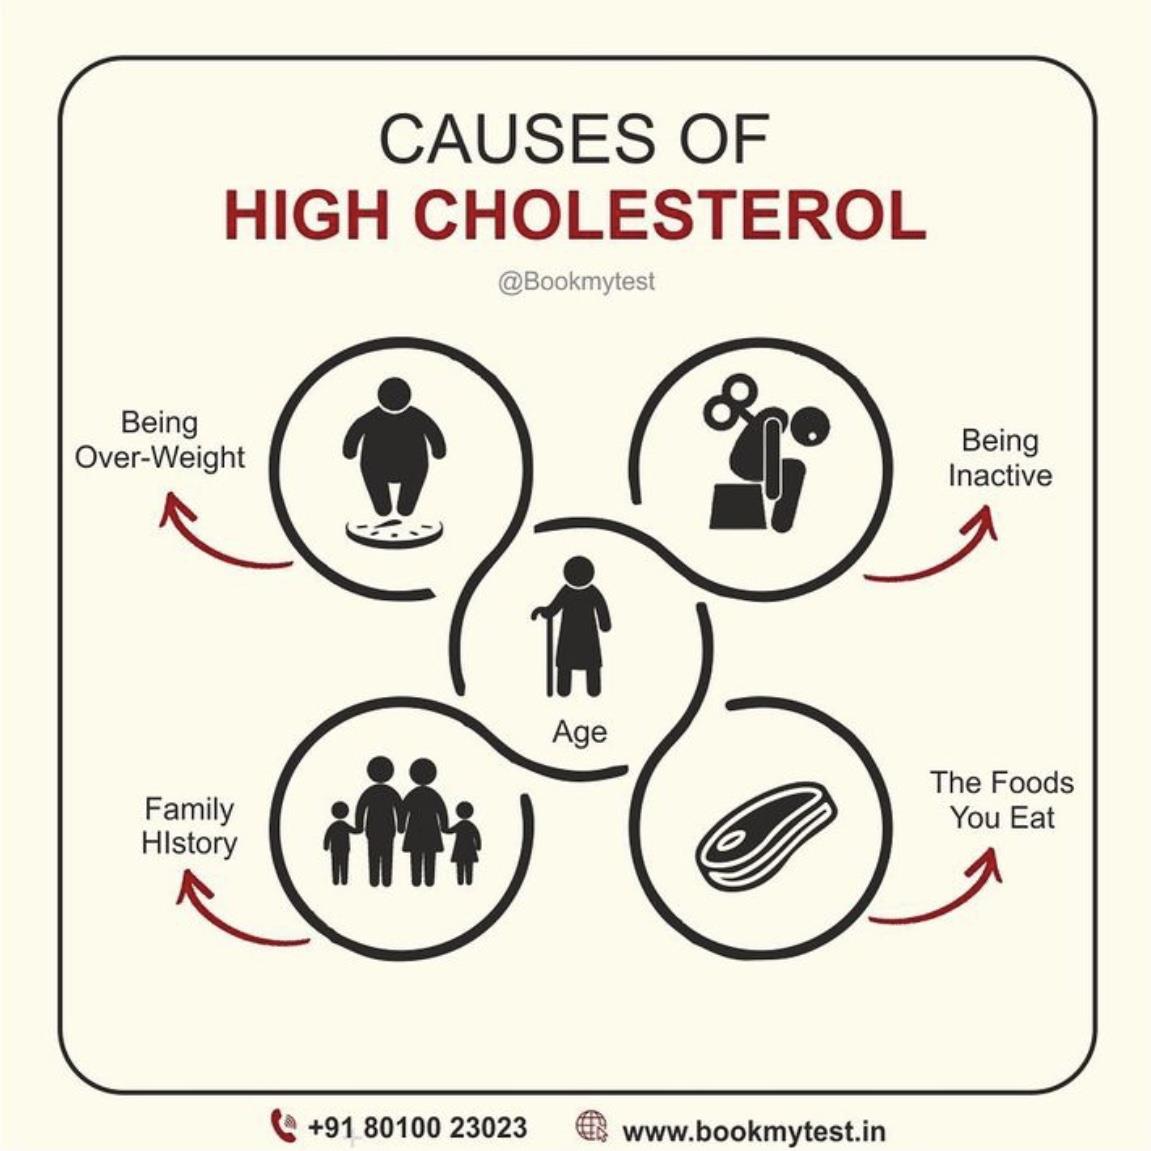 Causes of High Cholesterol